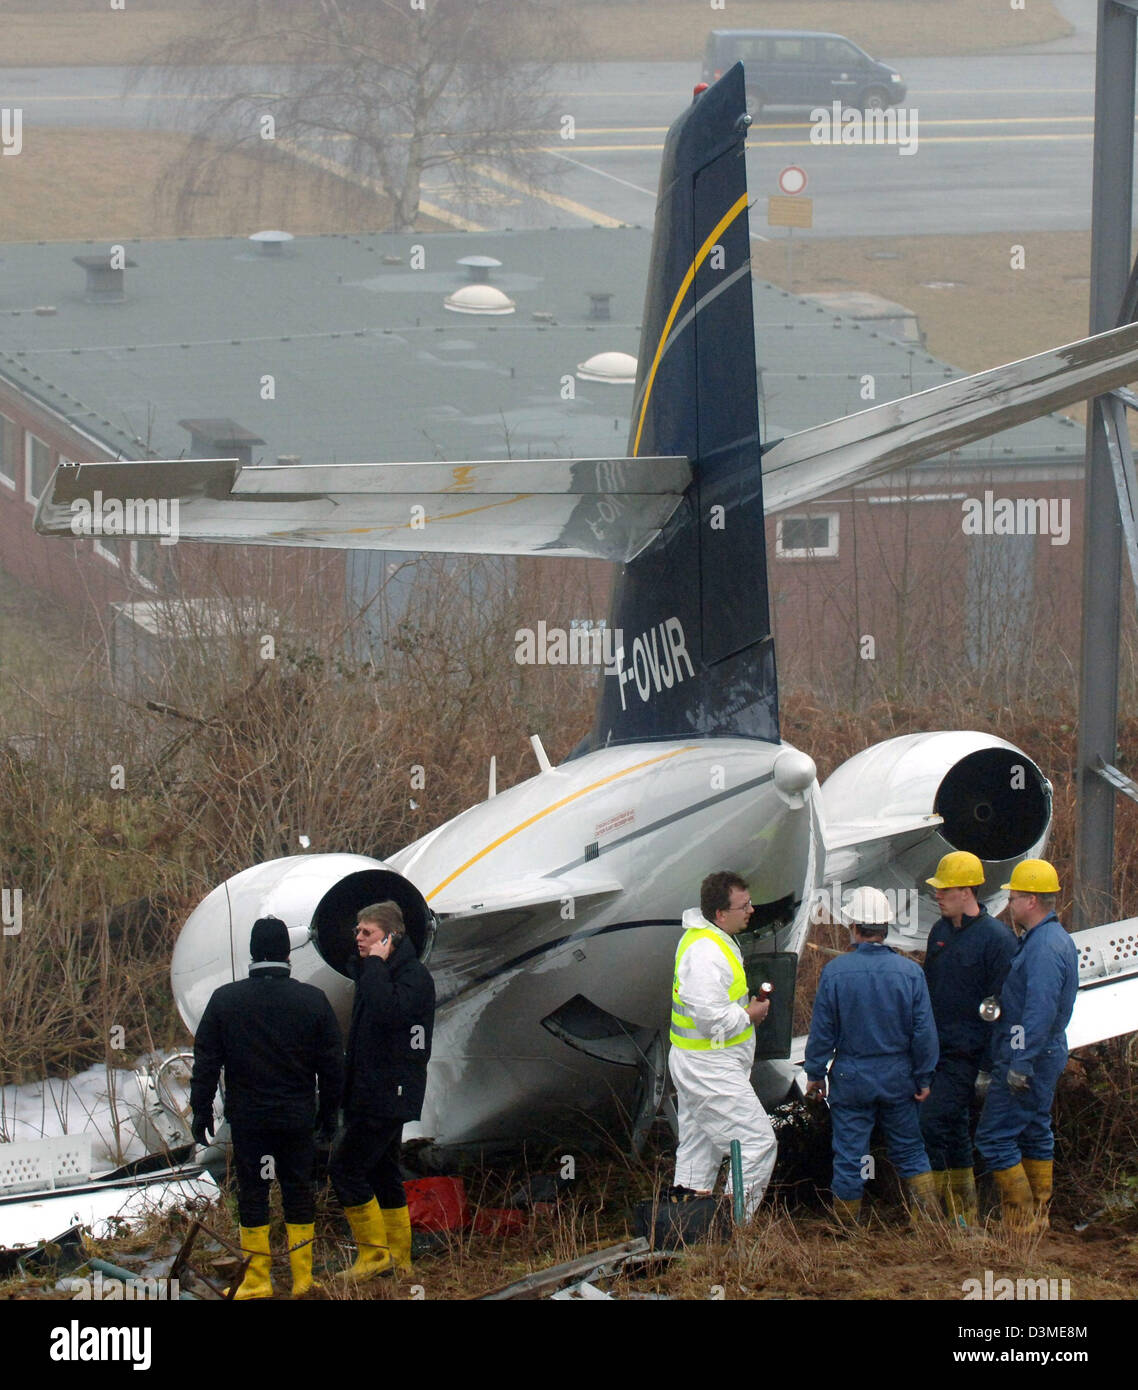 Experts of the Federal Office for Flight Investigation and police are in action at Kiel Airport, Germany, Thursday 16 February 2006. A plane with six people believed aboard made an emergency landing at a German airport Wednesday evening with a fire in its cockpit, police said. All aboard were injured but there was no immediate word on how badly. Initial reports had said 30 people w Stock Photo